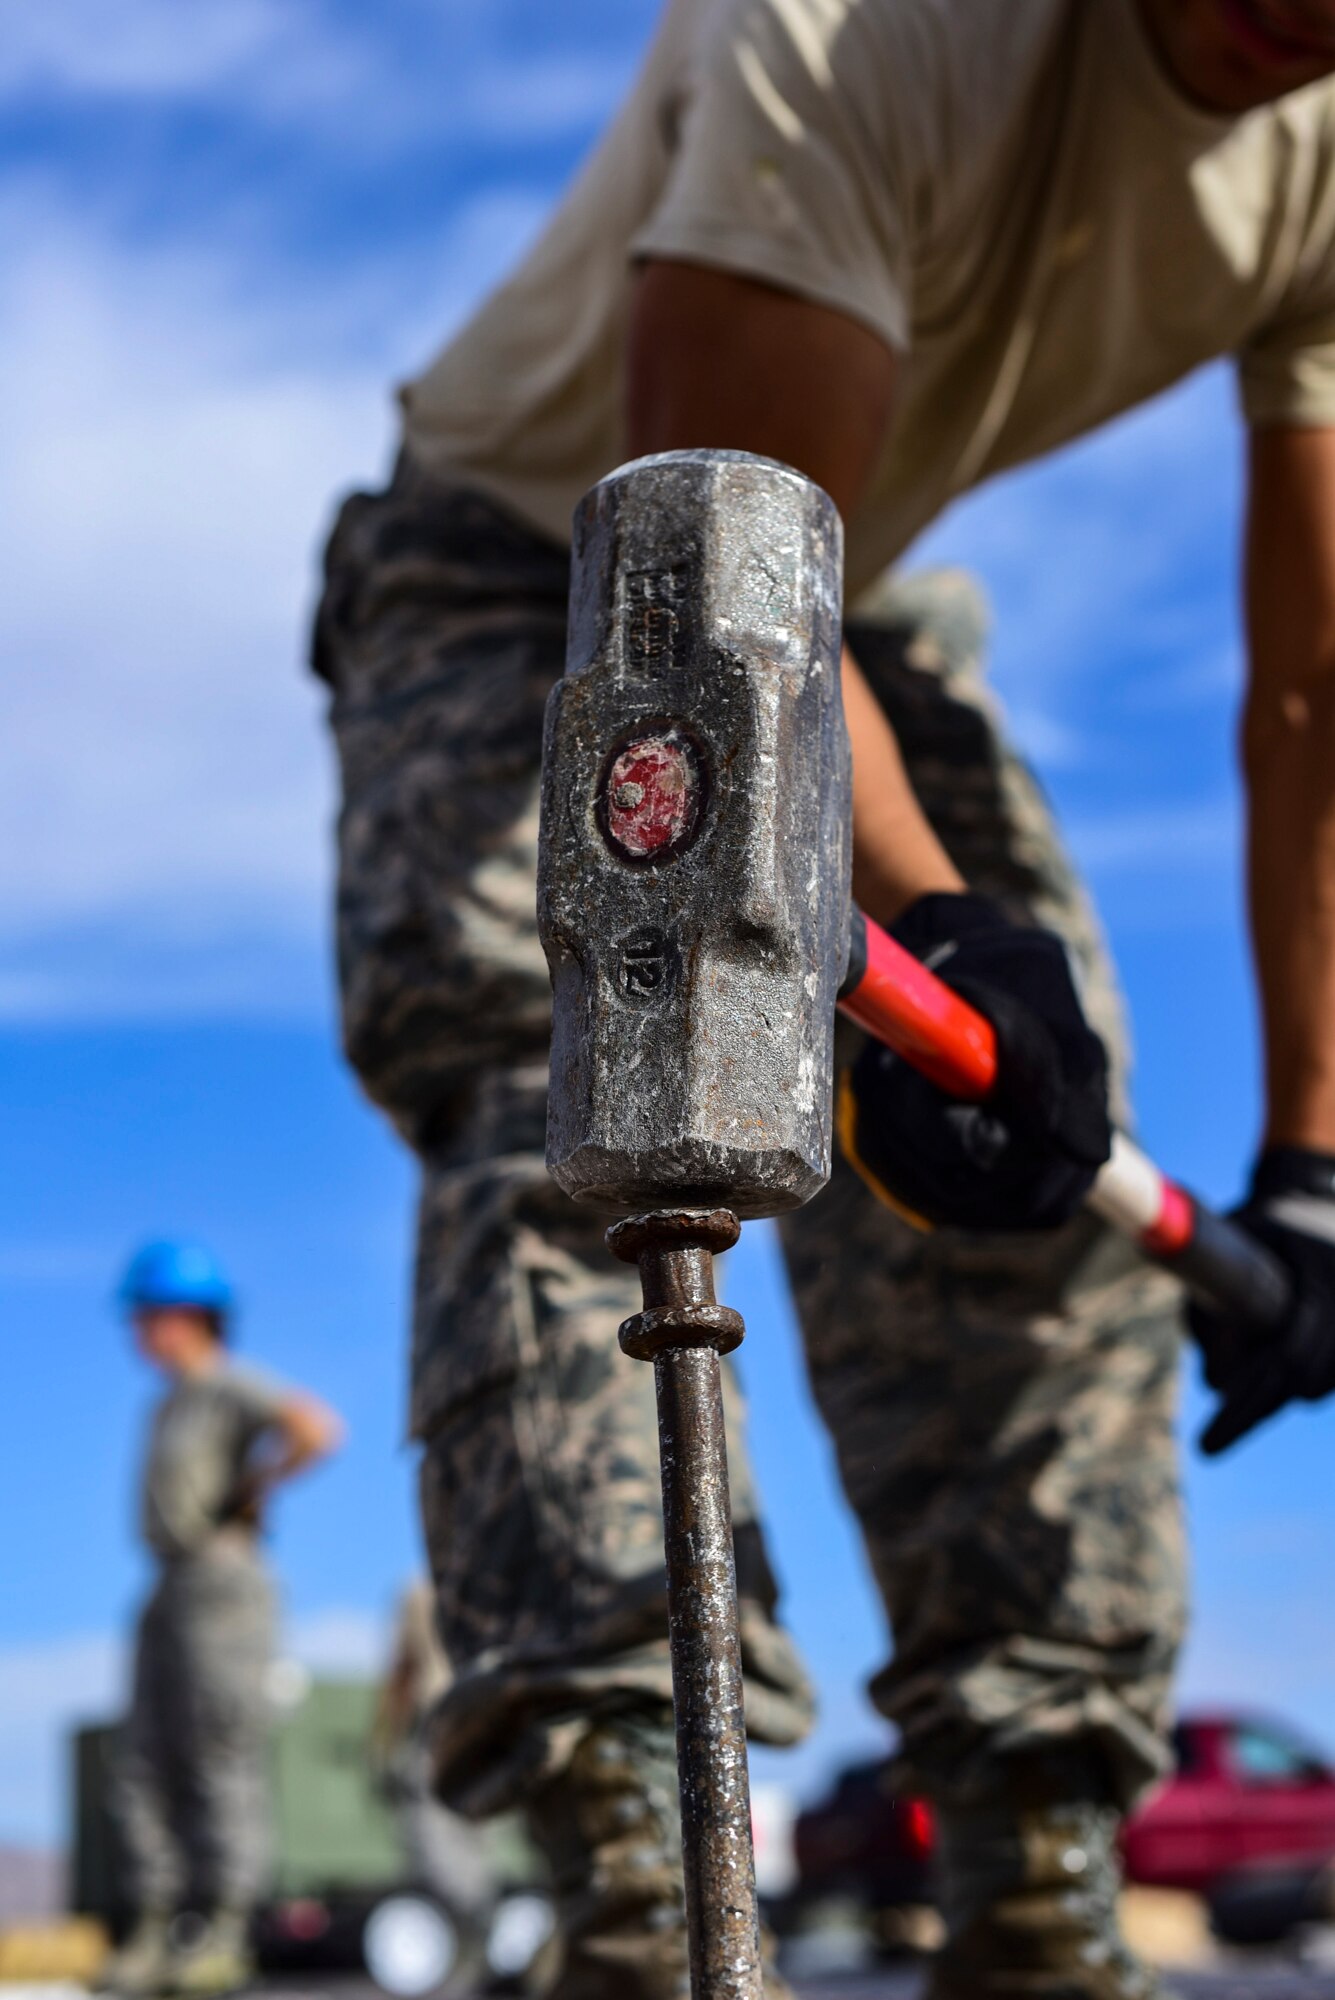 A 99th Civil Engineer Squadron structural engineer drives a stake into the ground during a base emergency engineer force training exercise at Nellis Air Force Base, Nevada, Oct. 19, 2017. The 99th CES conducted their monthly base emergency engineer force training exercise to practice bare base setup and airfield repair. (U.S. Air Force photo by Airman 1st Class Andrew D. Sarver/Released)